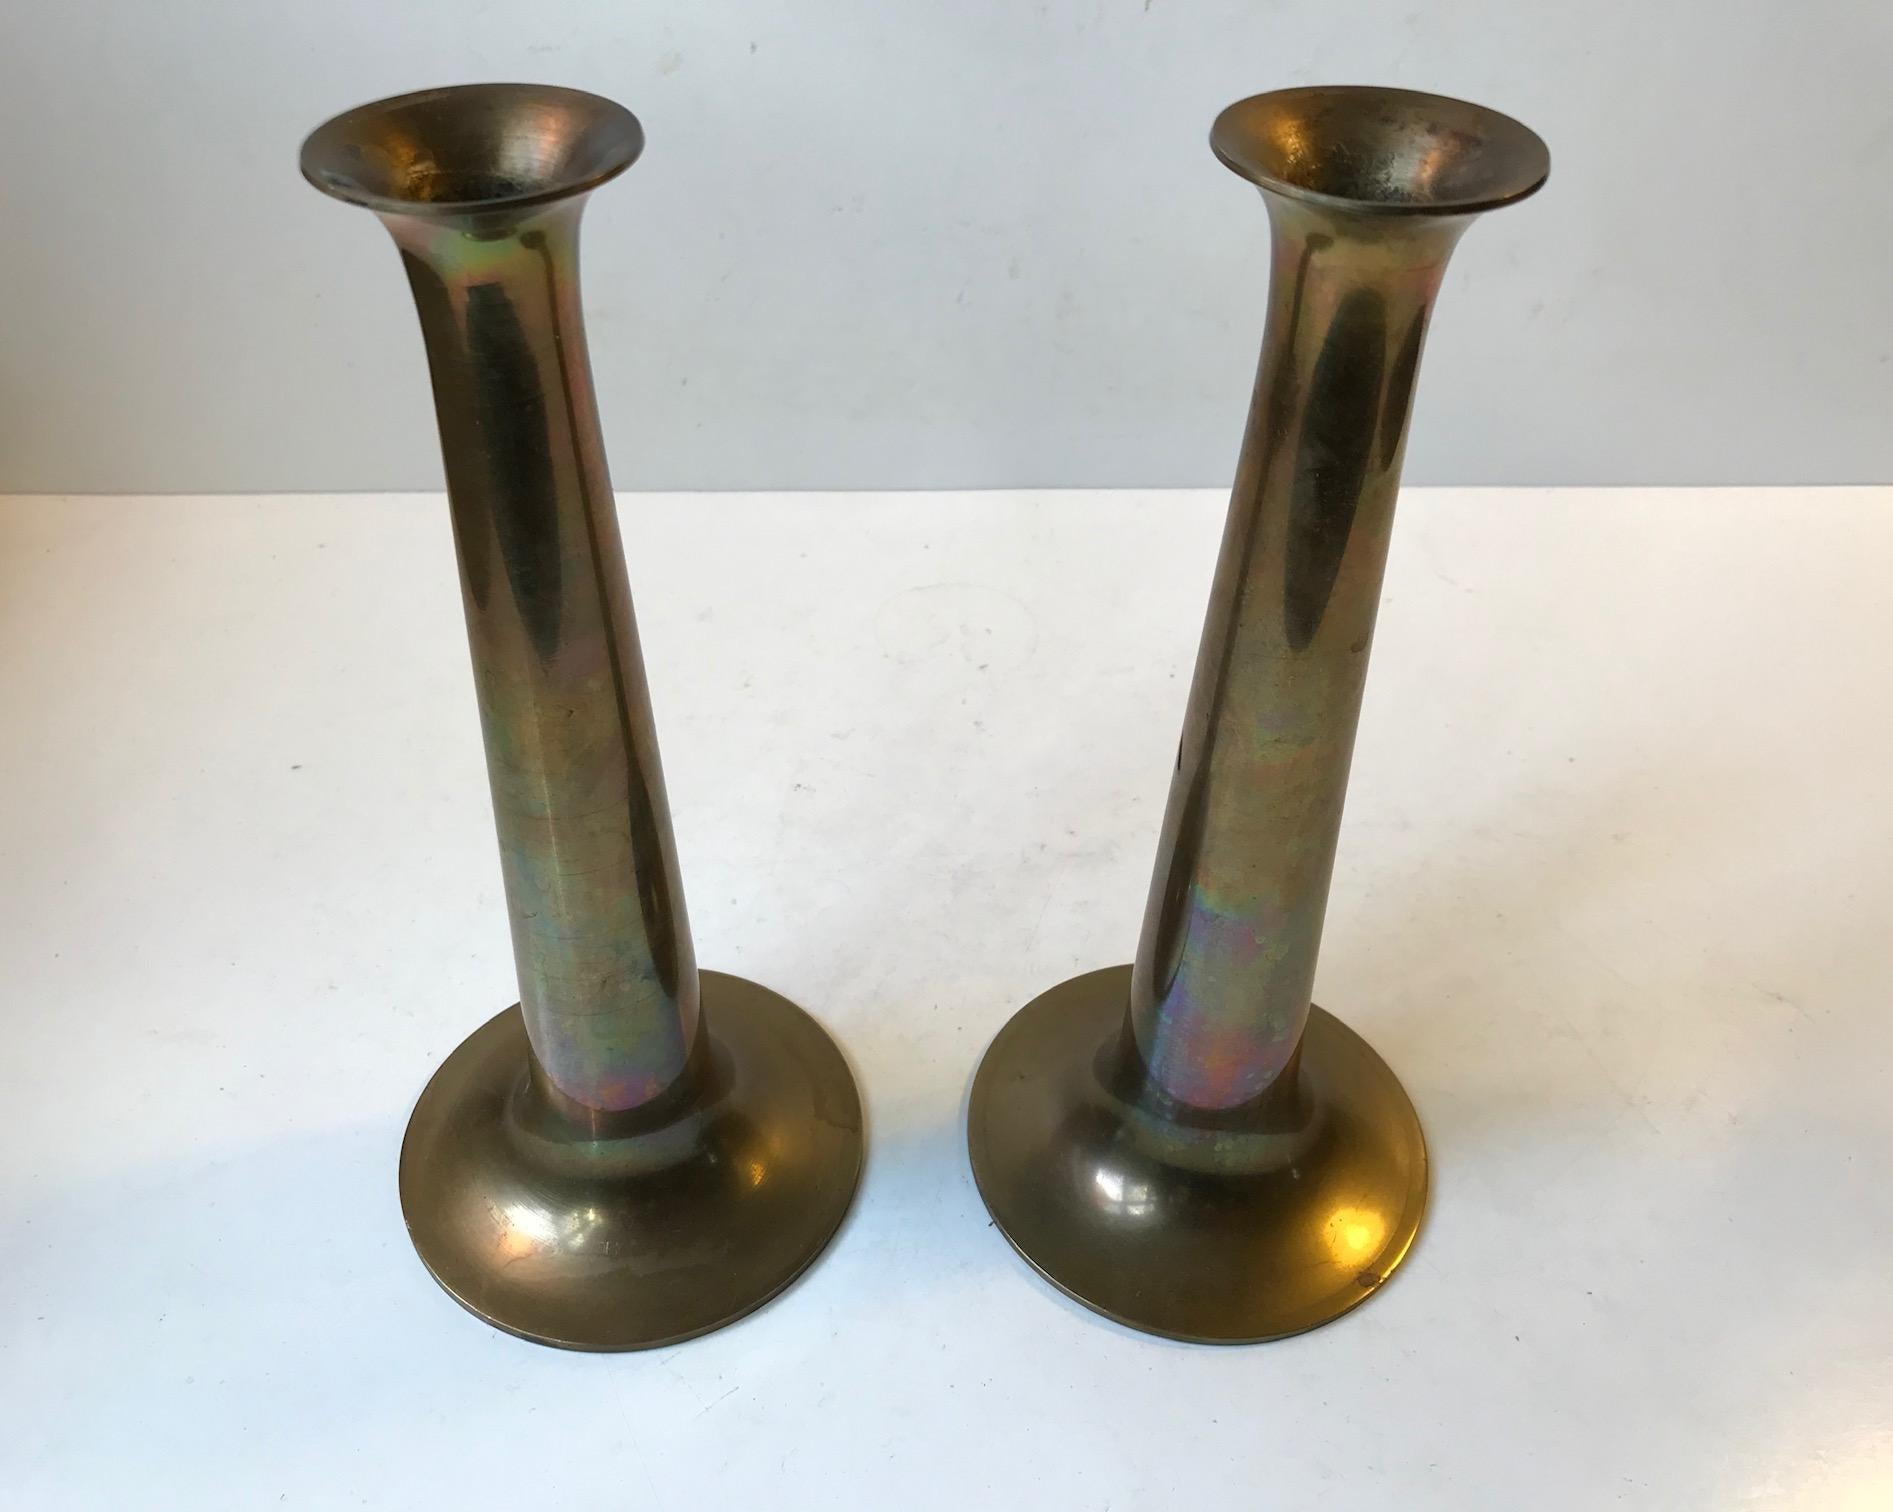 This pair of candlesticks was designed by Hans Bolling and manufactured by Torben Ørskov in Denmark during the 1960s. They are made from solid brass and feature the manufacturer's mark to each base. Please notice the beautiful rainbow patina they